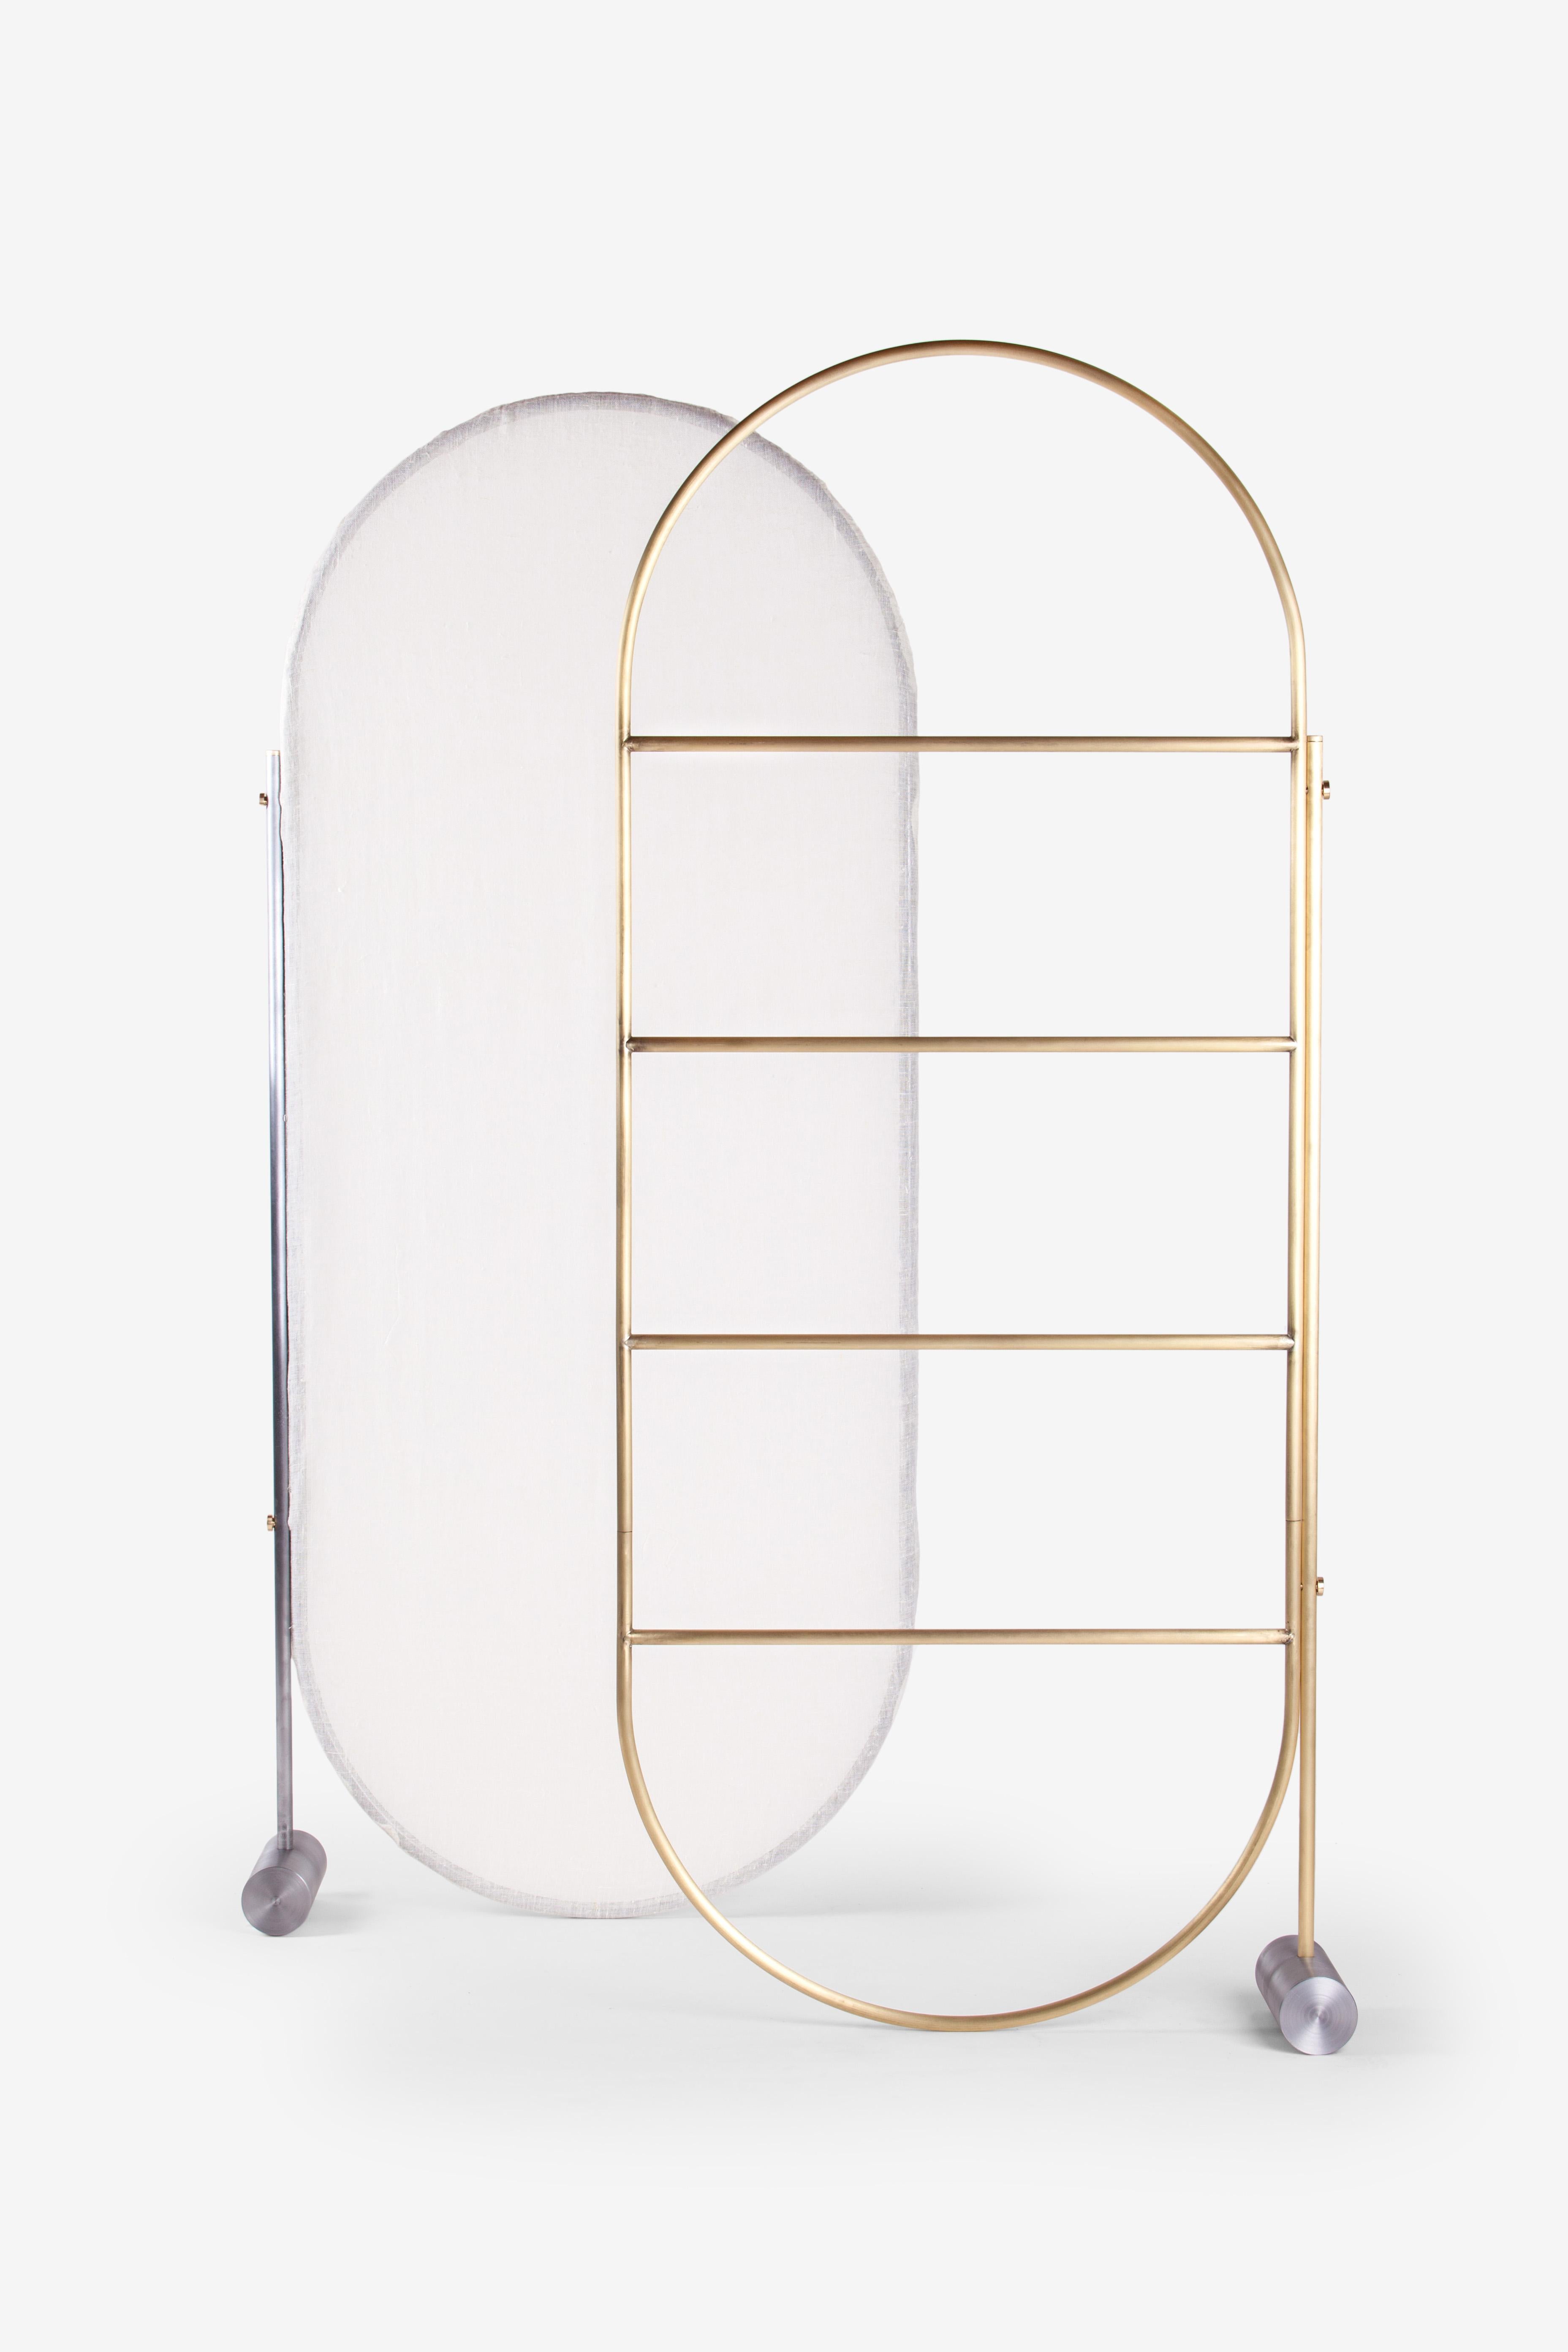 Italian Separè Room Divider with Semi-Transparent and Natural Fabric by Mingardo For Sale